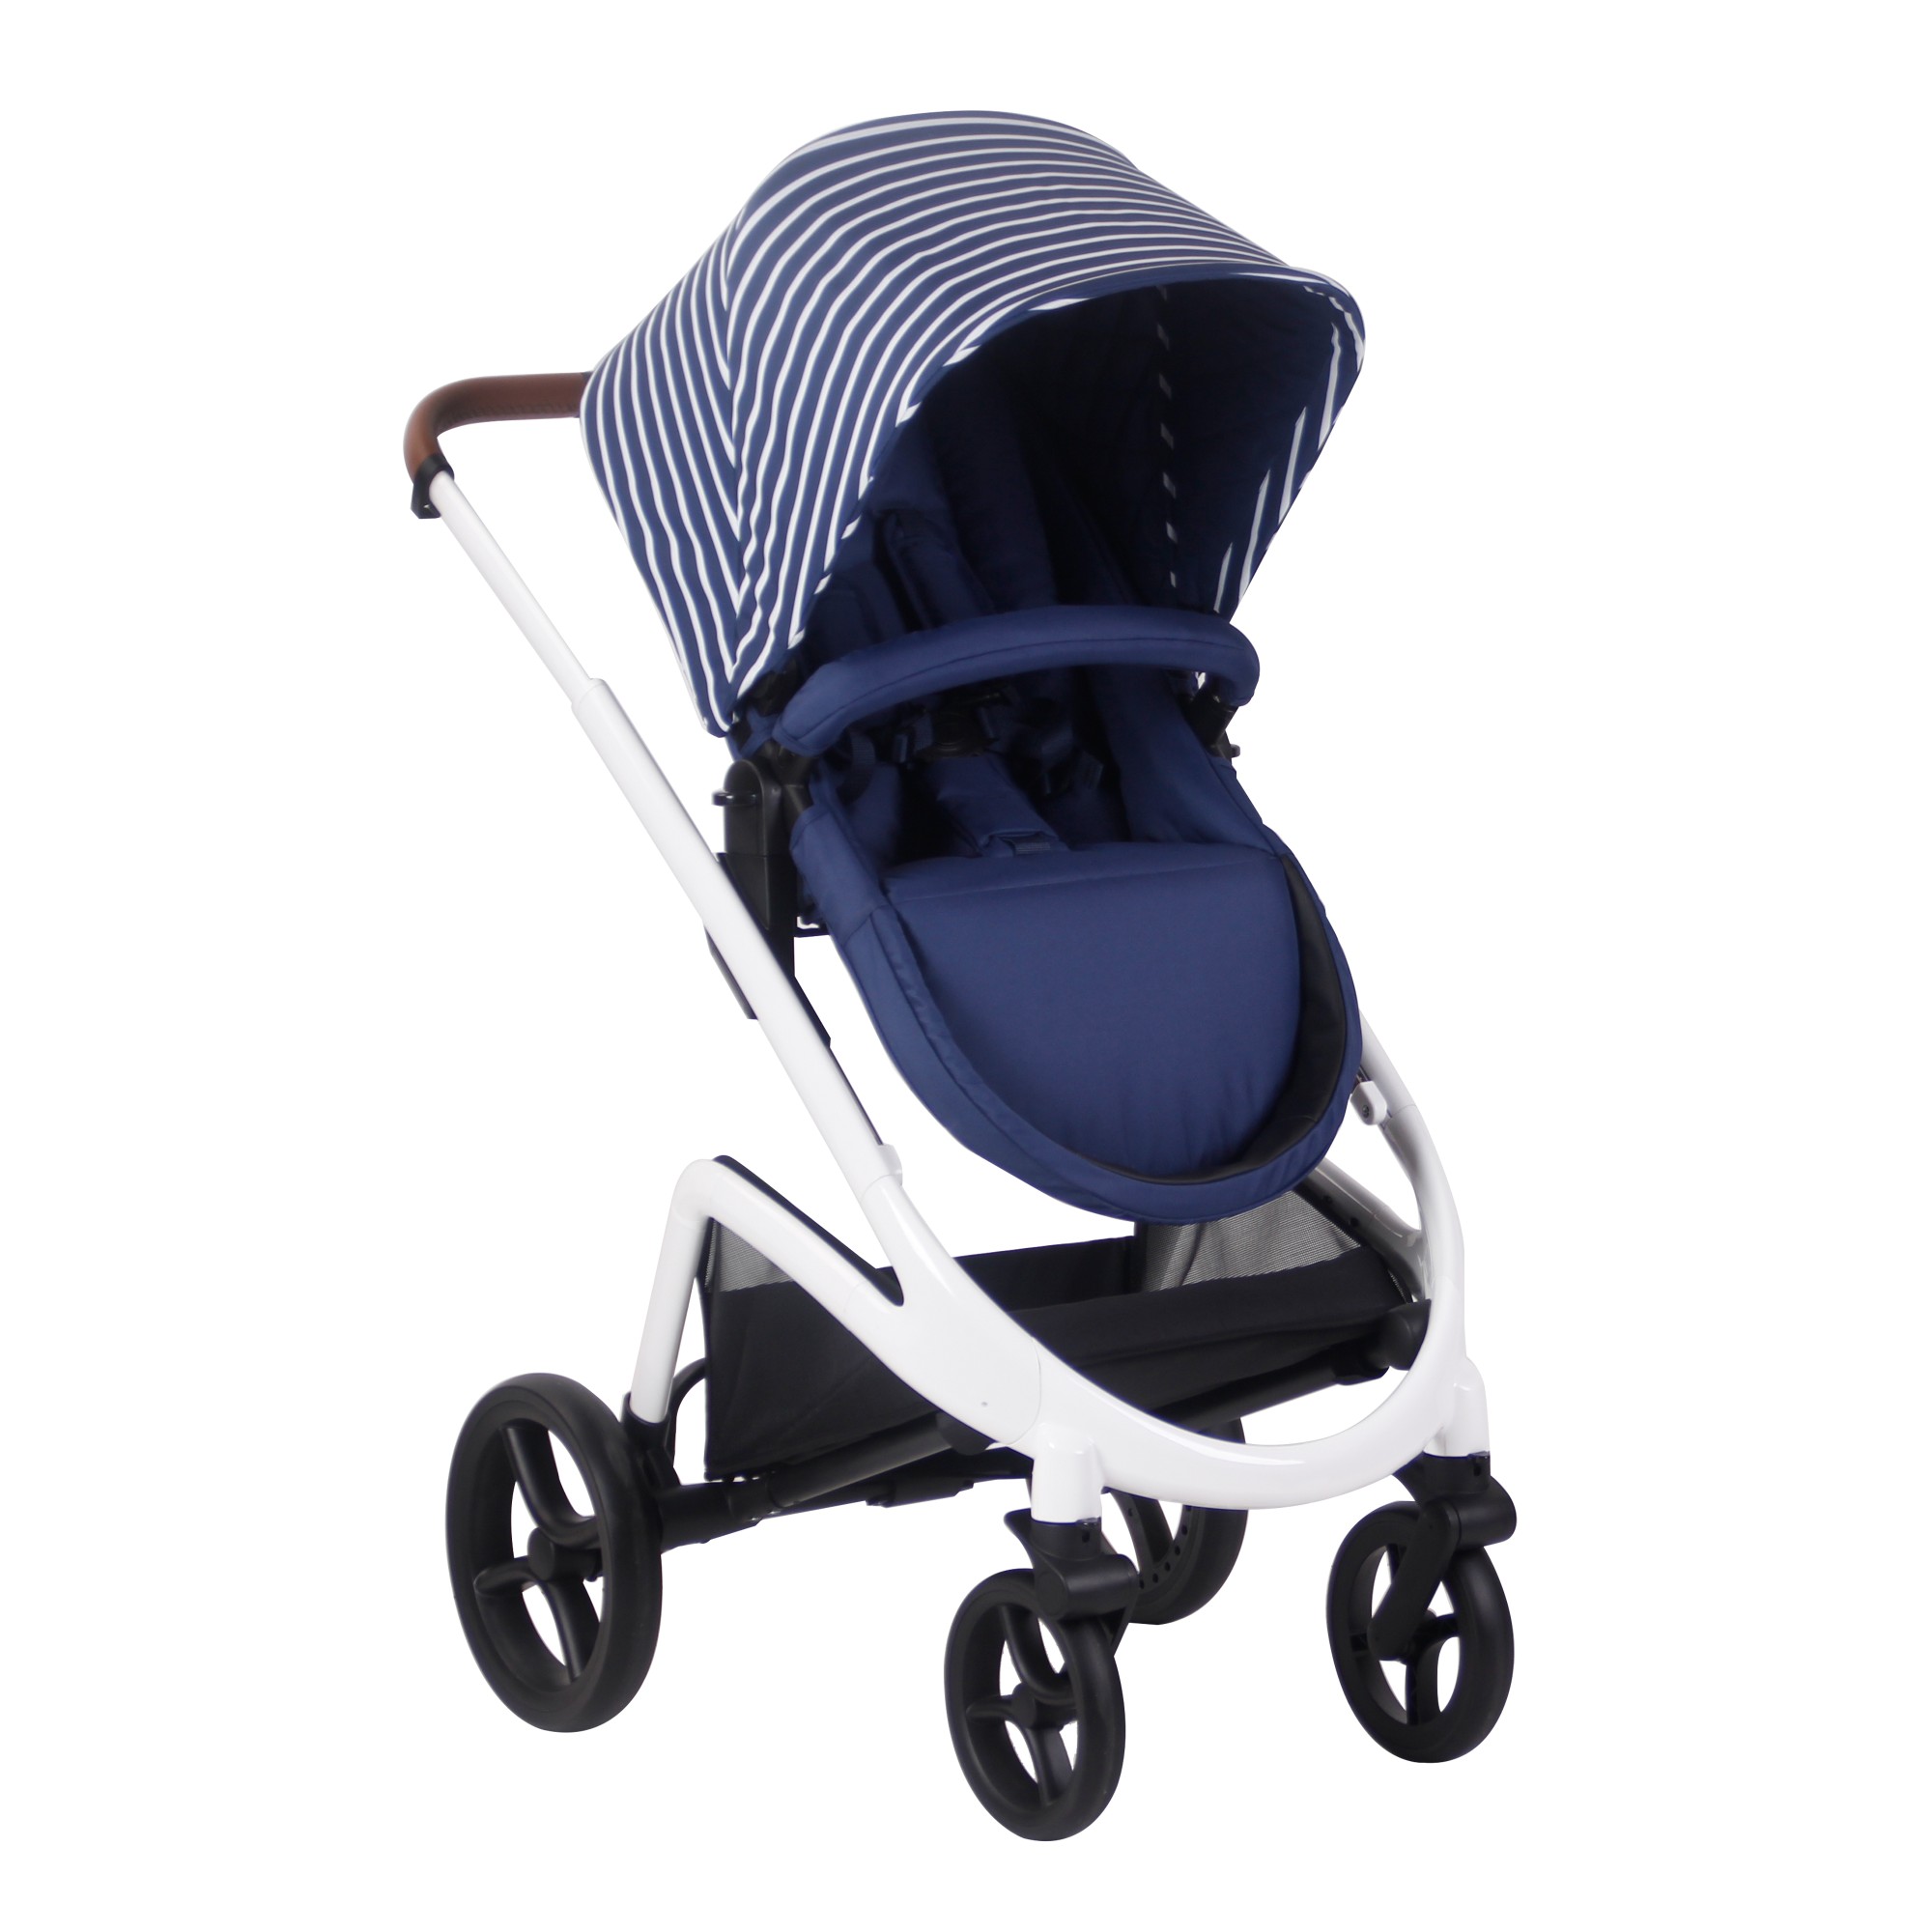 dreamiie by samantha faiers mb300 grey stripes travel system